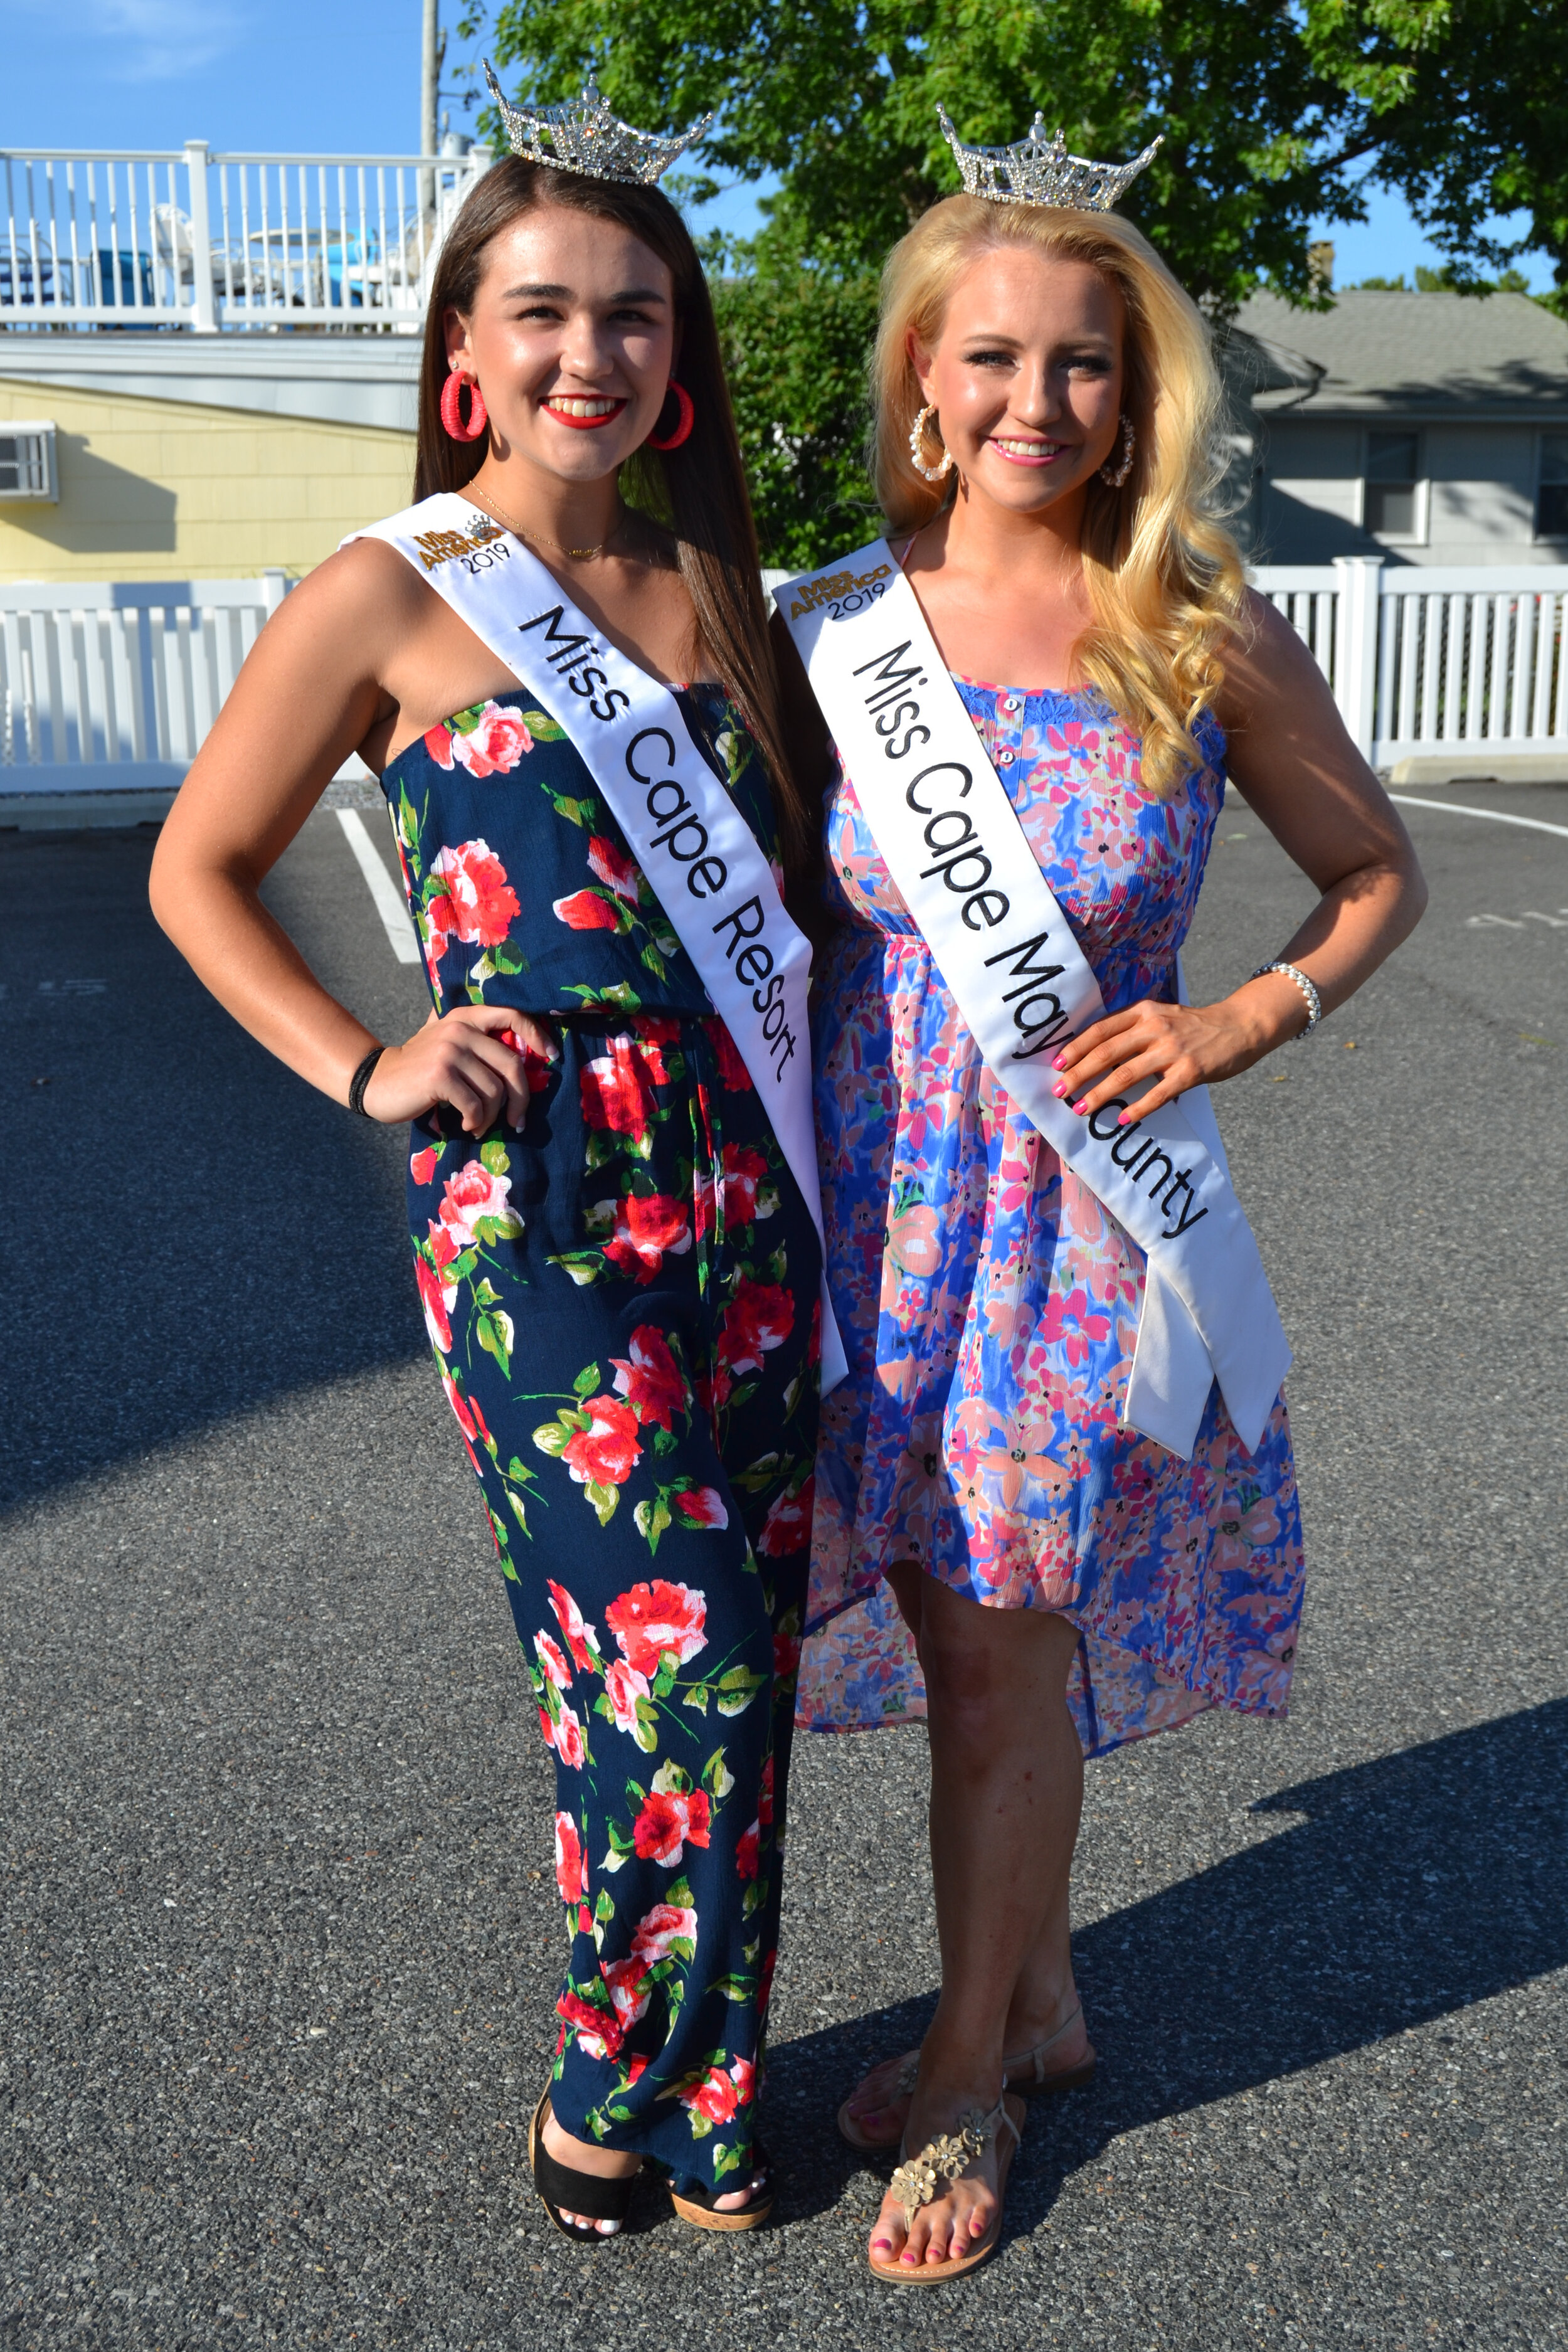 Miss Cape Resort Abby Waid and  Miss Cape May County Amy Phillips